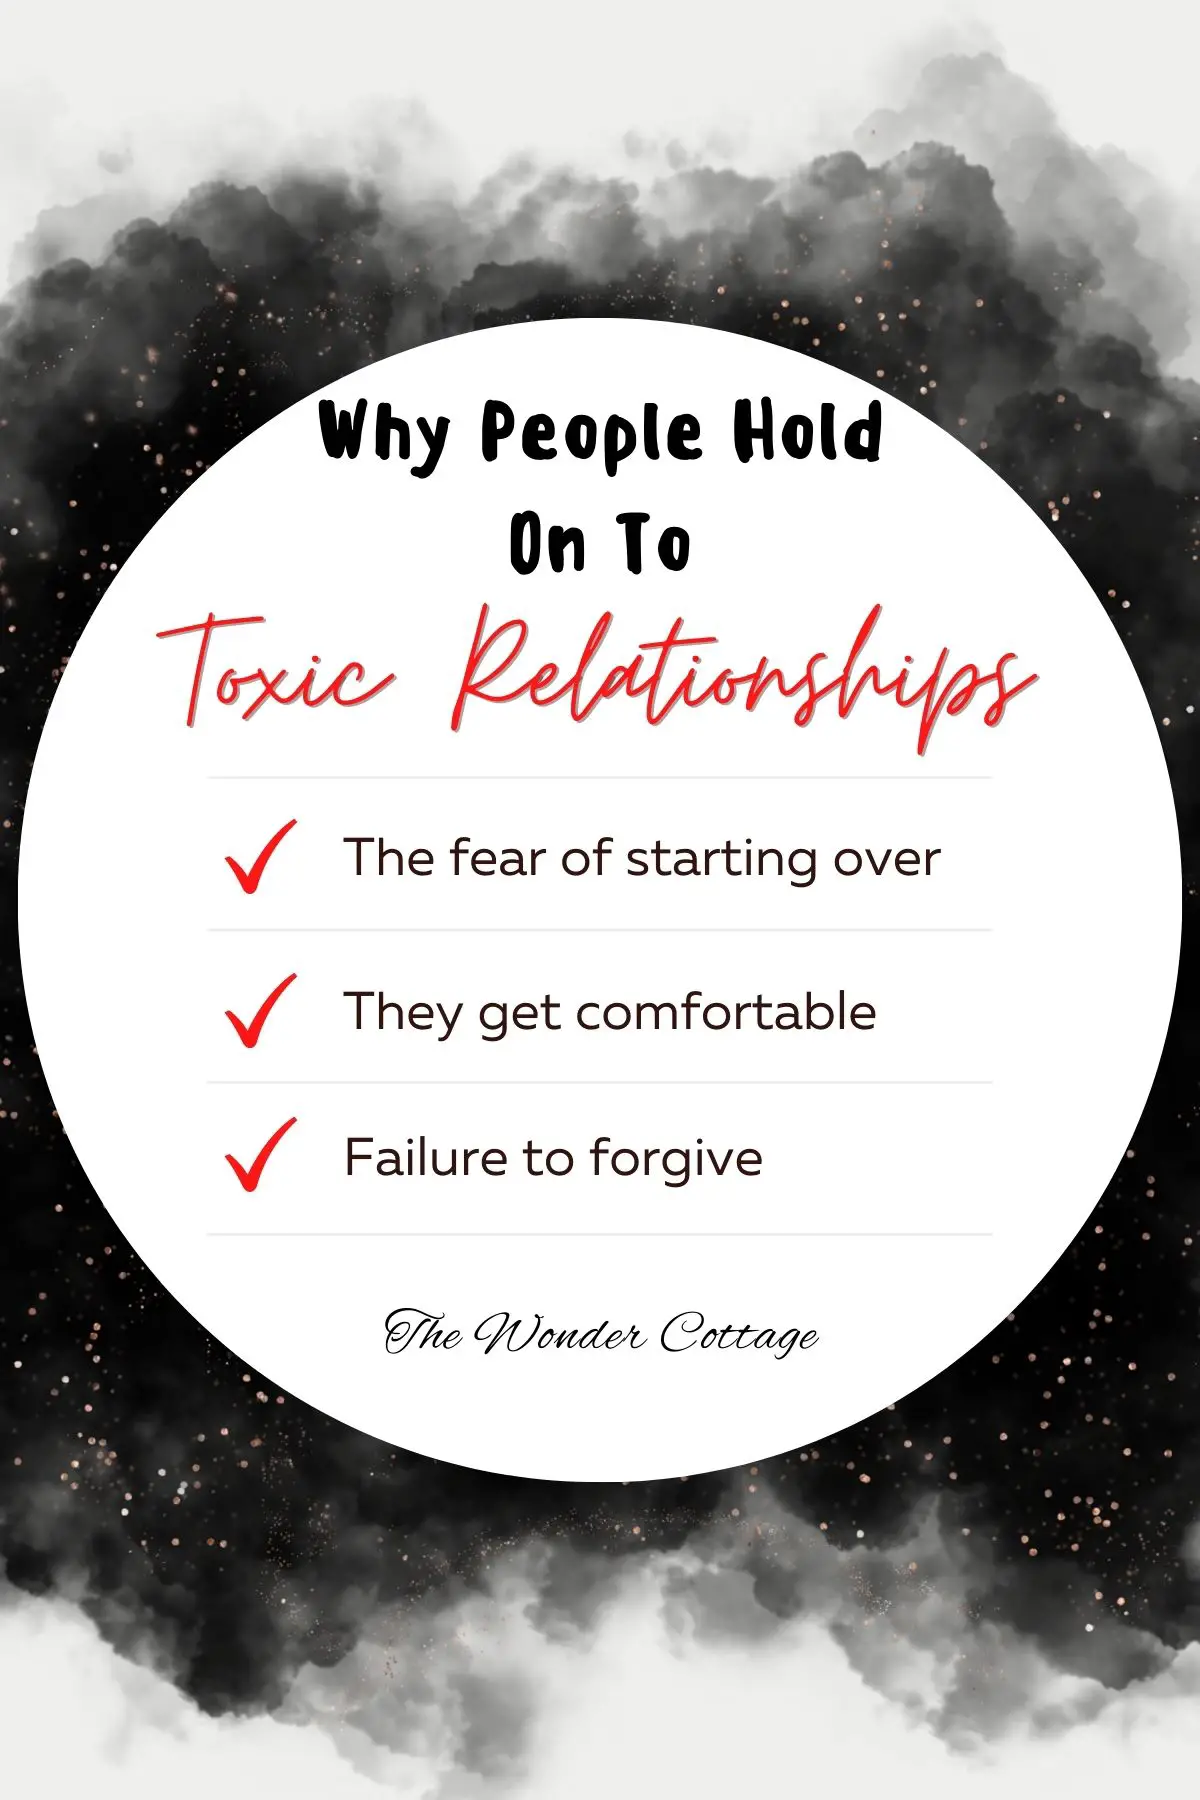 Why people hold on to toxic relationships